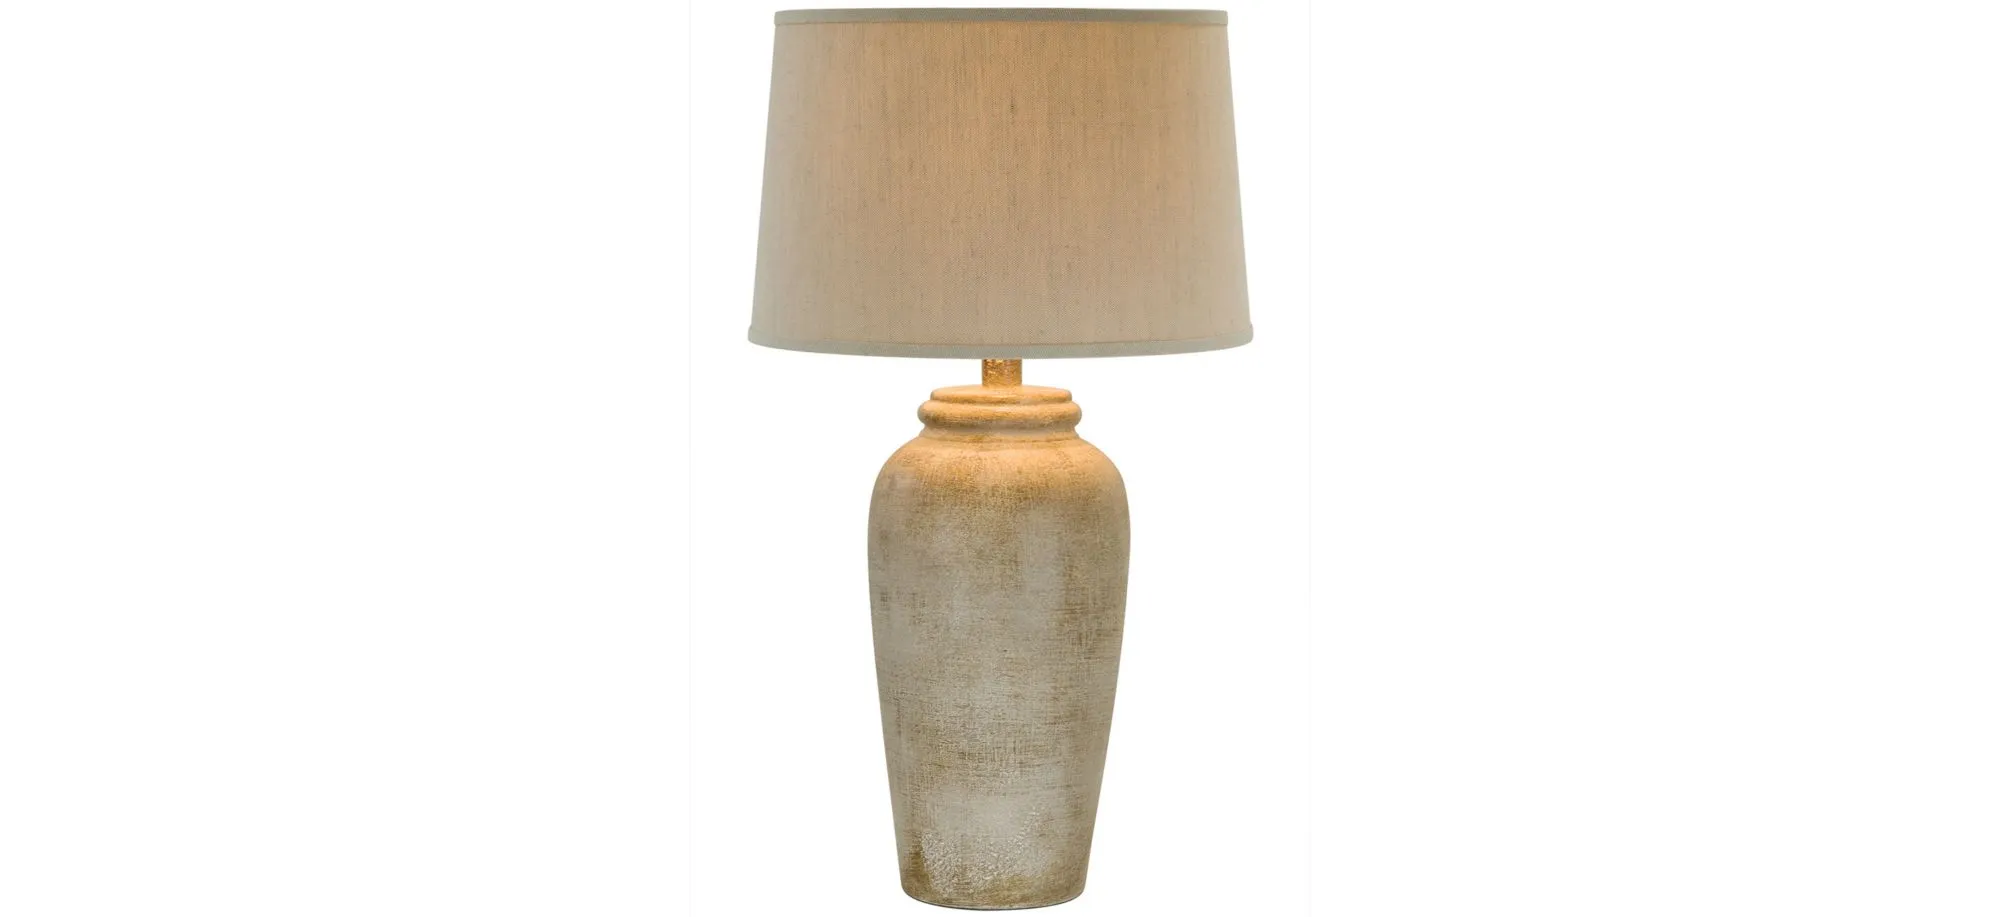 Barton Table Lamp in Sand Stone by Anthony California